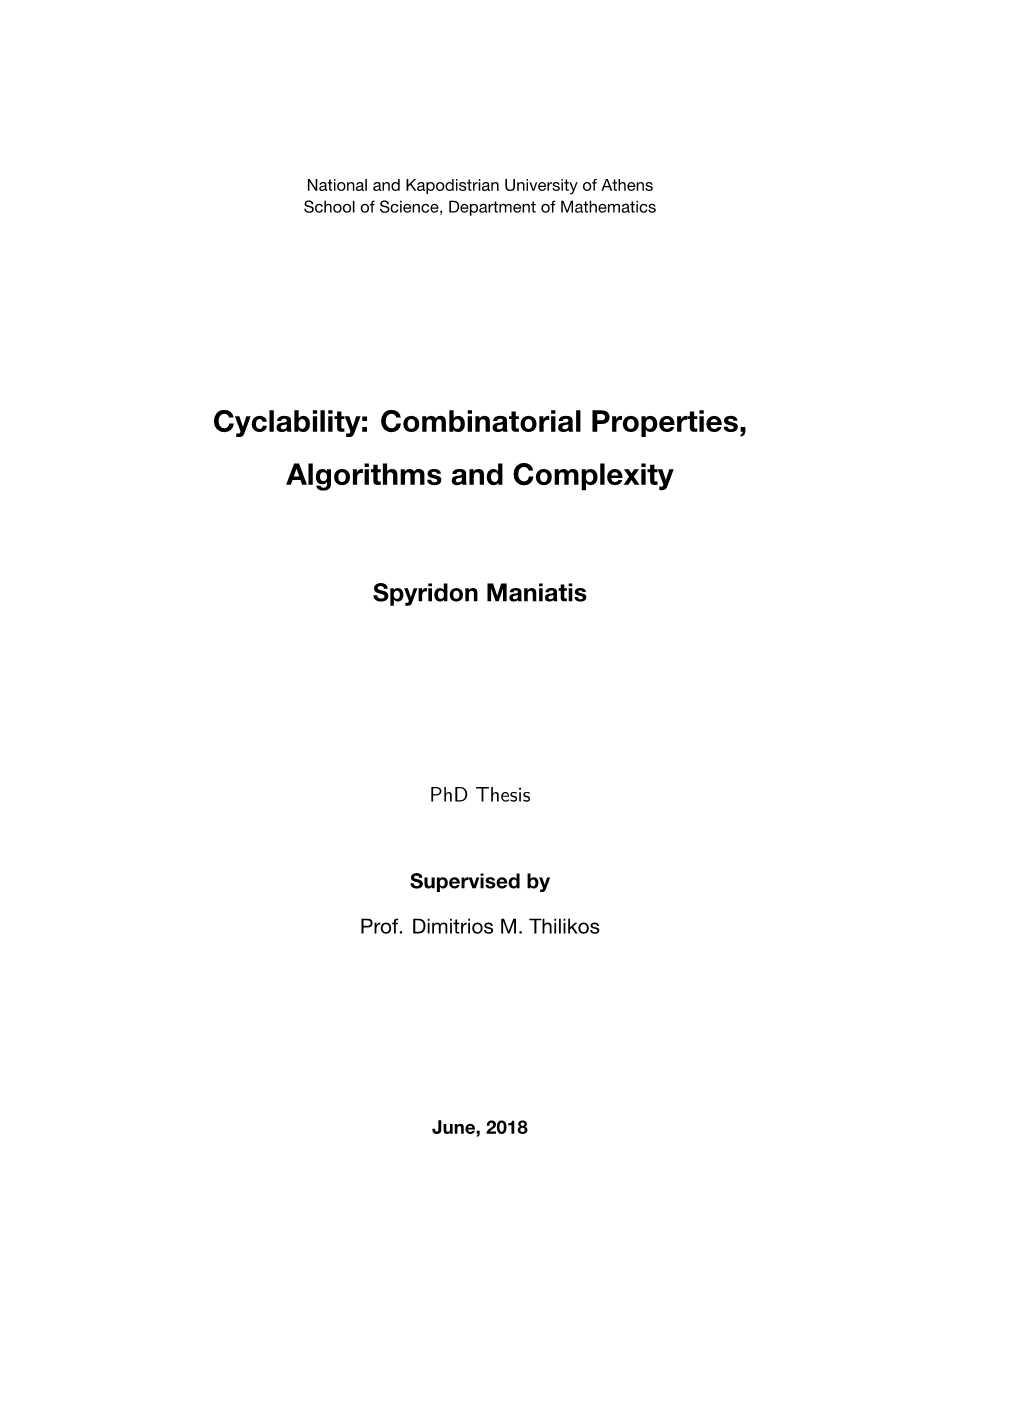 Cyclability: Combinatorial Properties, Algorithms and Complexity